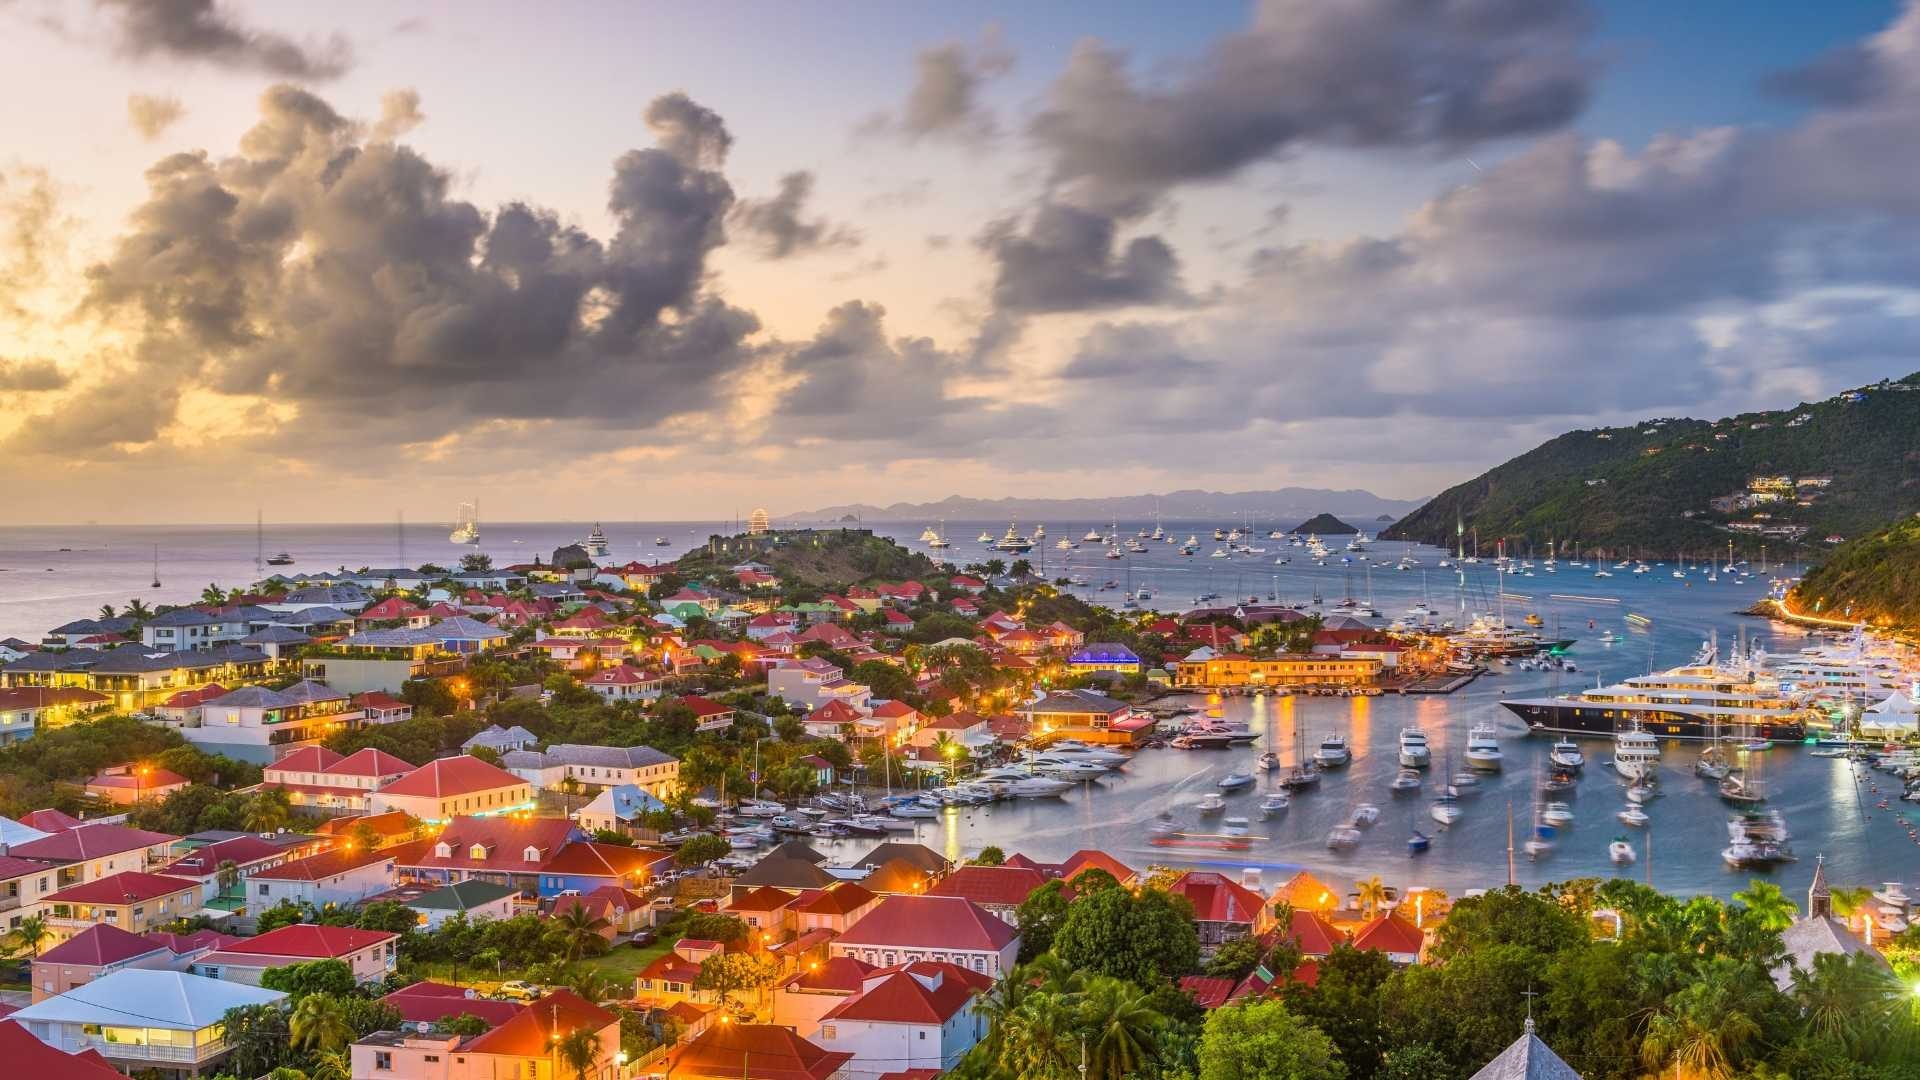 Ferry to Saint Barthlemy, Transport information, Travel routes, Access to the island, 1920x1080 Full HD Desktop